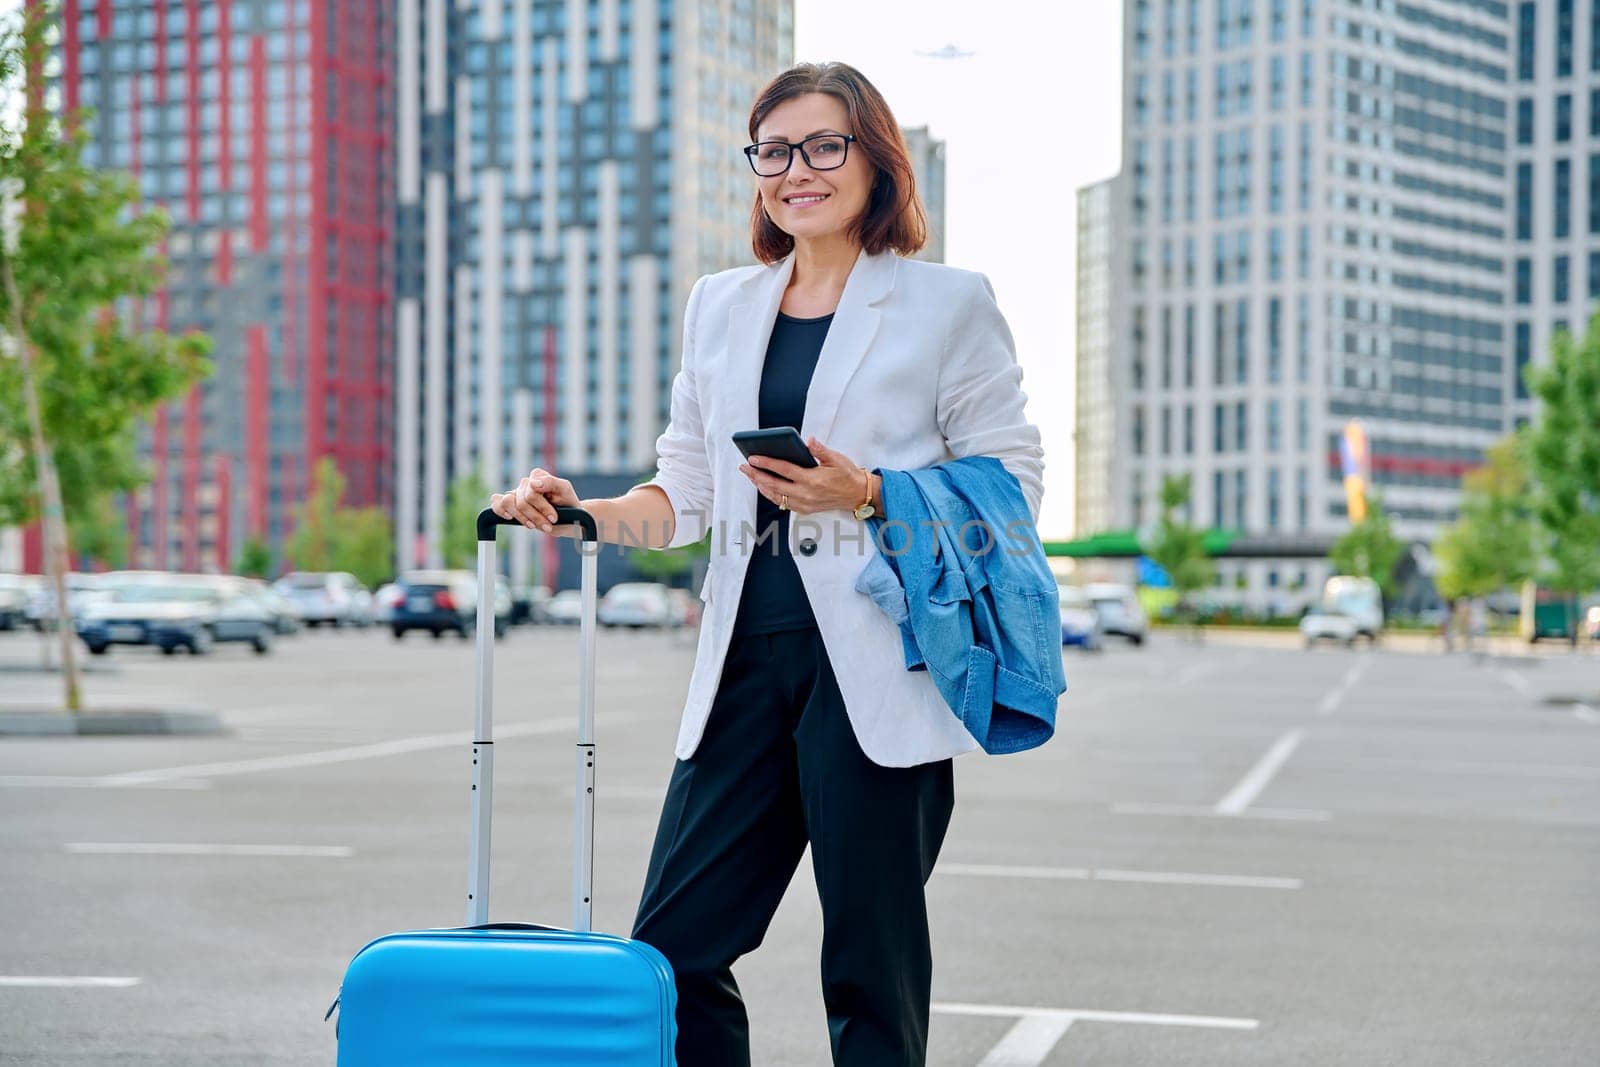 Middle aged confident business woman with suitcase, urban background. Smiling mature woman with smartphone luggage, looking at camera. Business trip, travel, city, work, lifestyle, people 40s concept